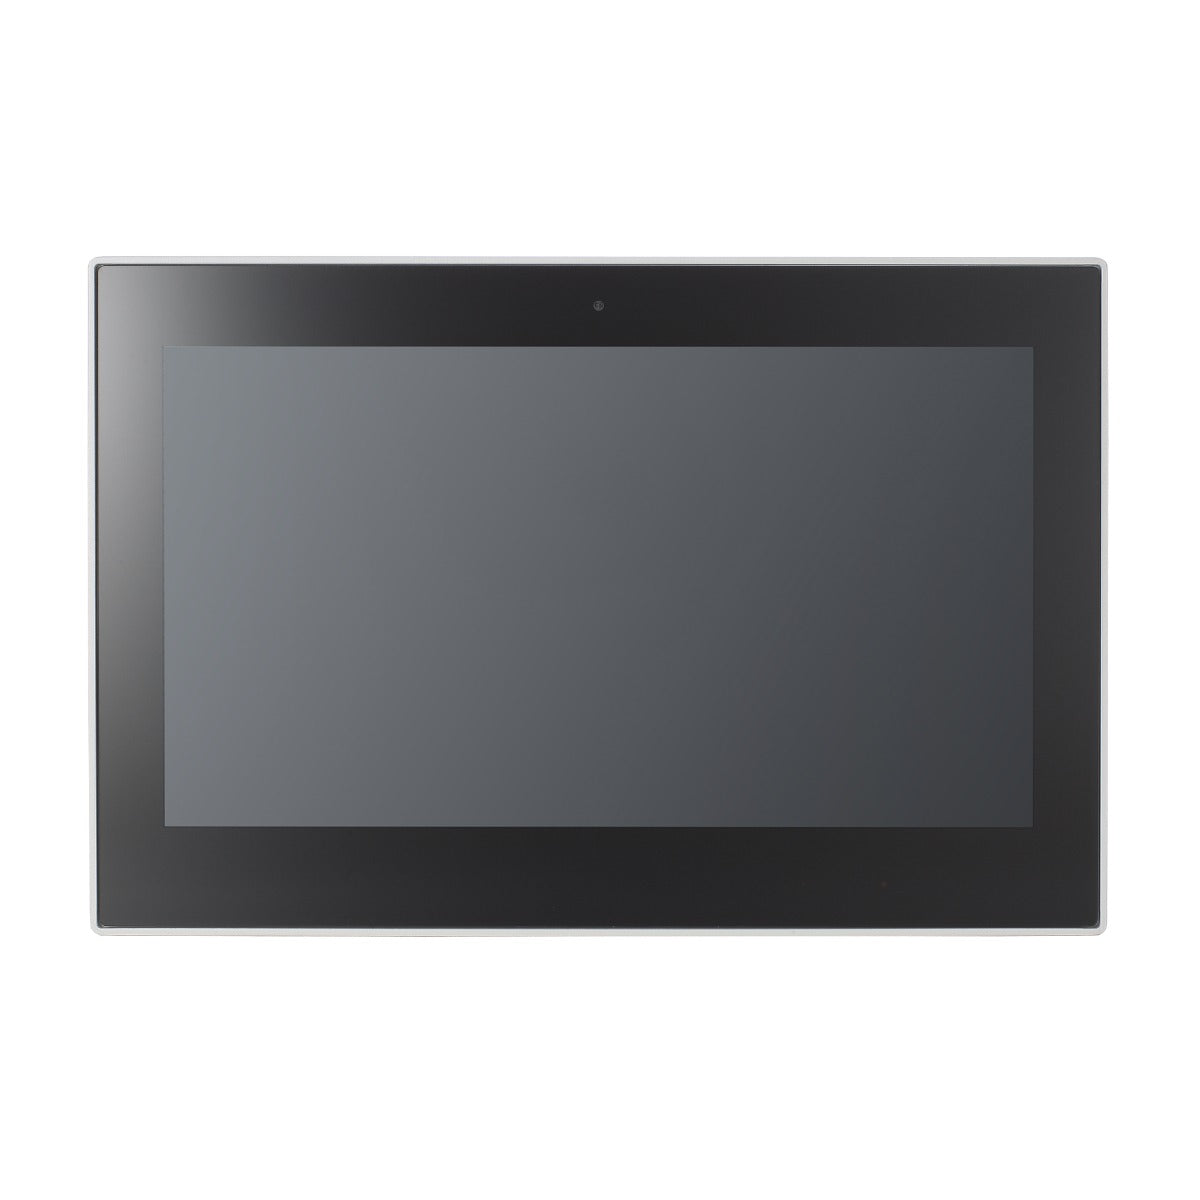 15.6 inch Touch Panel PC Moxa EXPC-F2150W front view